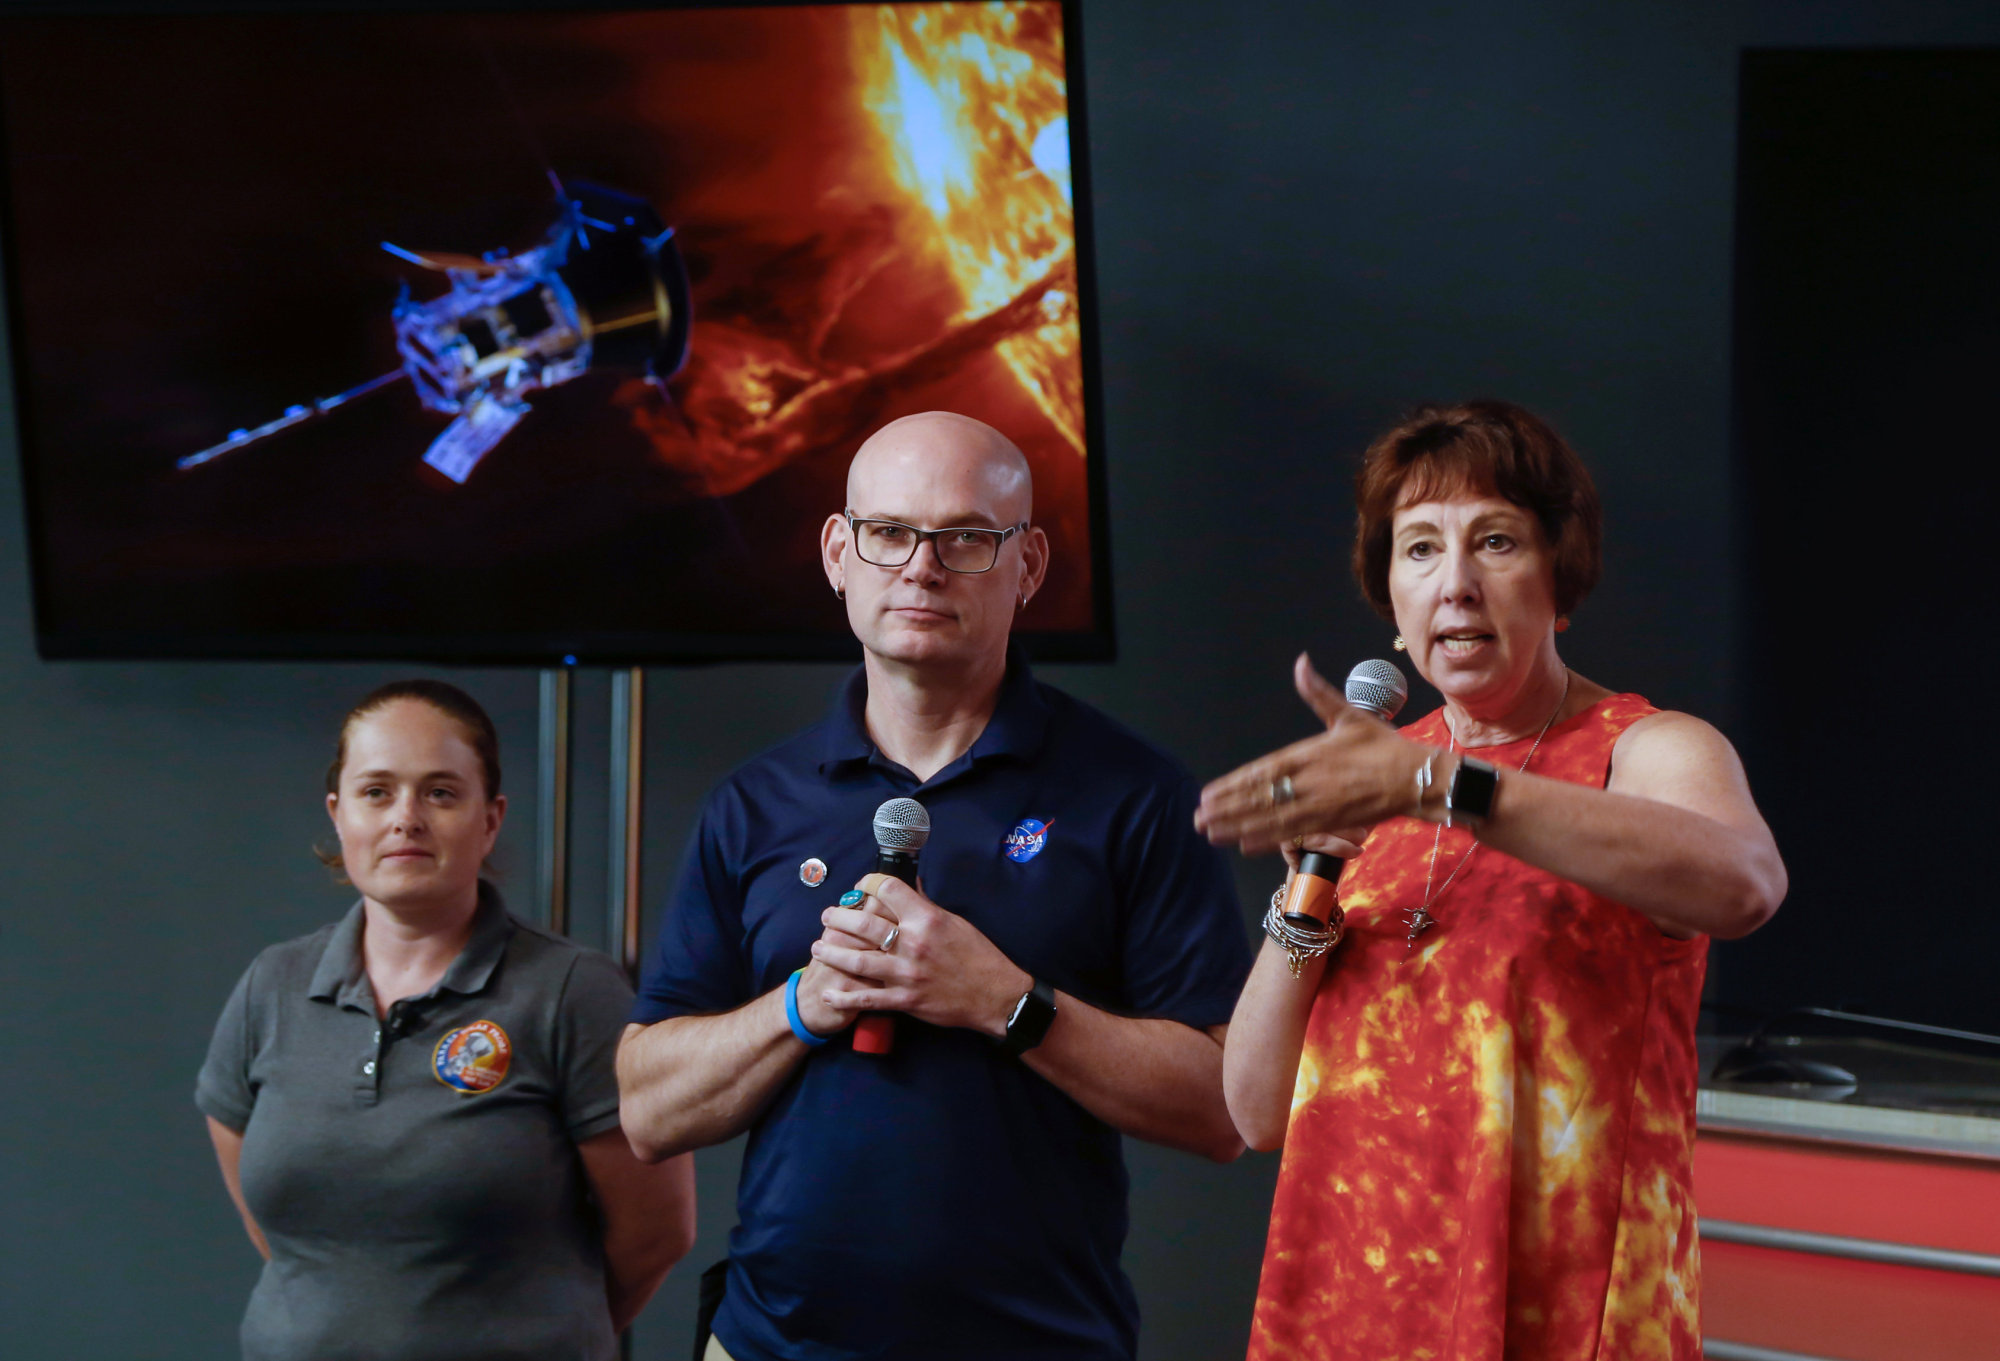 Alex Young, solar scientist at NASA's Goddard Space Flight Center (middle), Nicola Fox, Parker Solar Probe project scientist at Johns Hopkins Applied Physics Laboratory (right), and Betsy Congdon, also from the university's APL and a lead engineer on the mission, speak during a briefing at Kennedy Space Center in Cape Canaveral, Florida, on Friday. | REUTERS